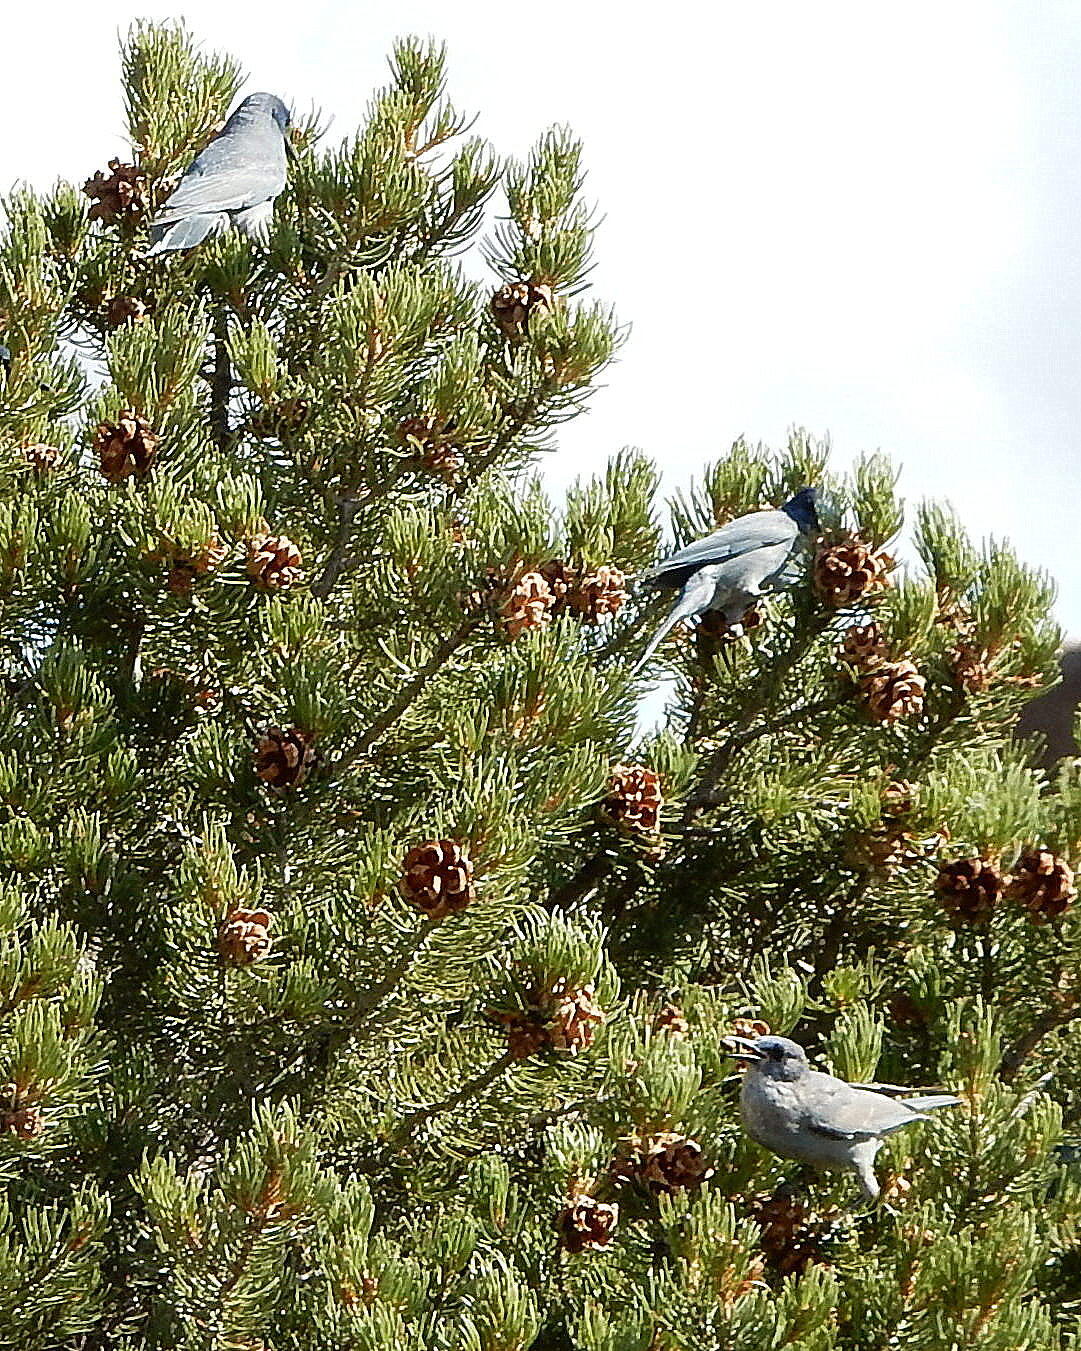 Three sky blue Pinyon Jays perch in a deep green Pinyon Pine heavy with cones.